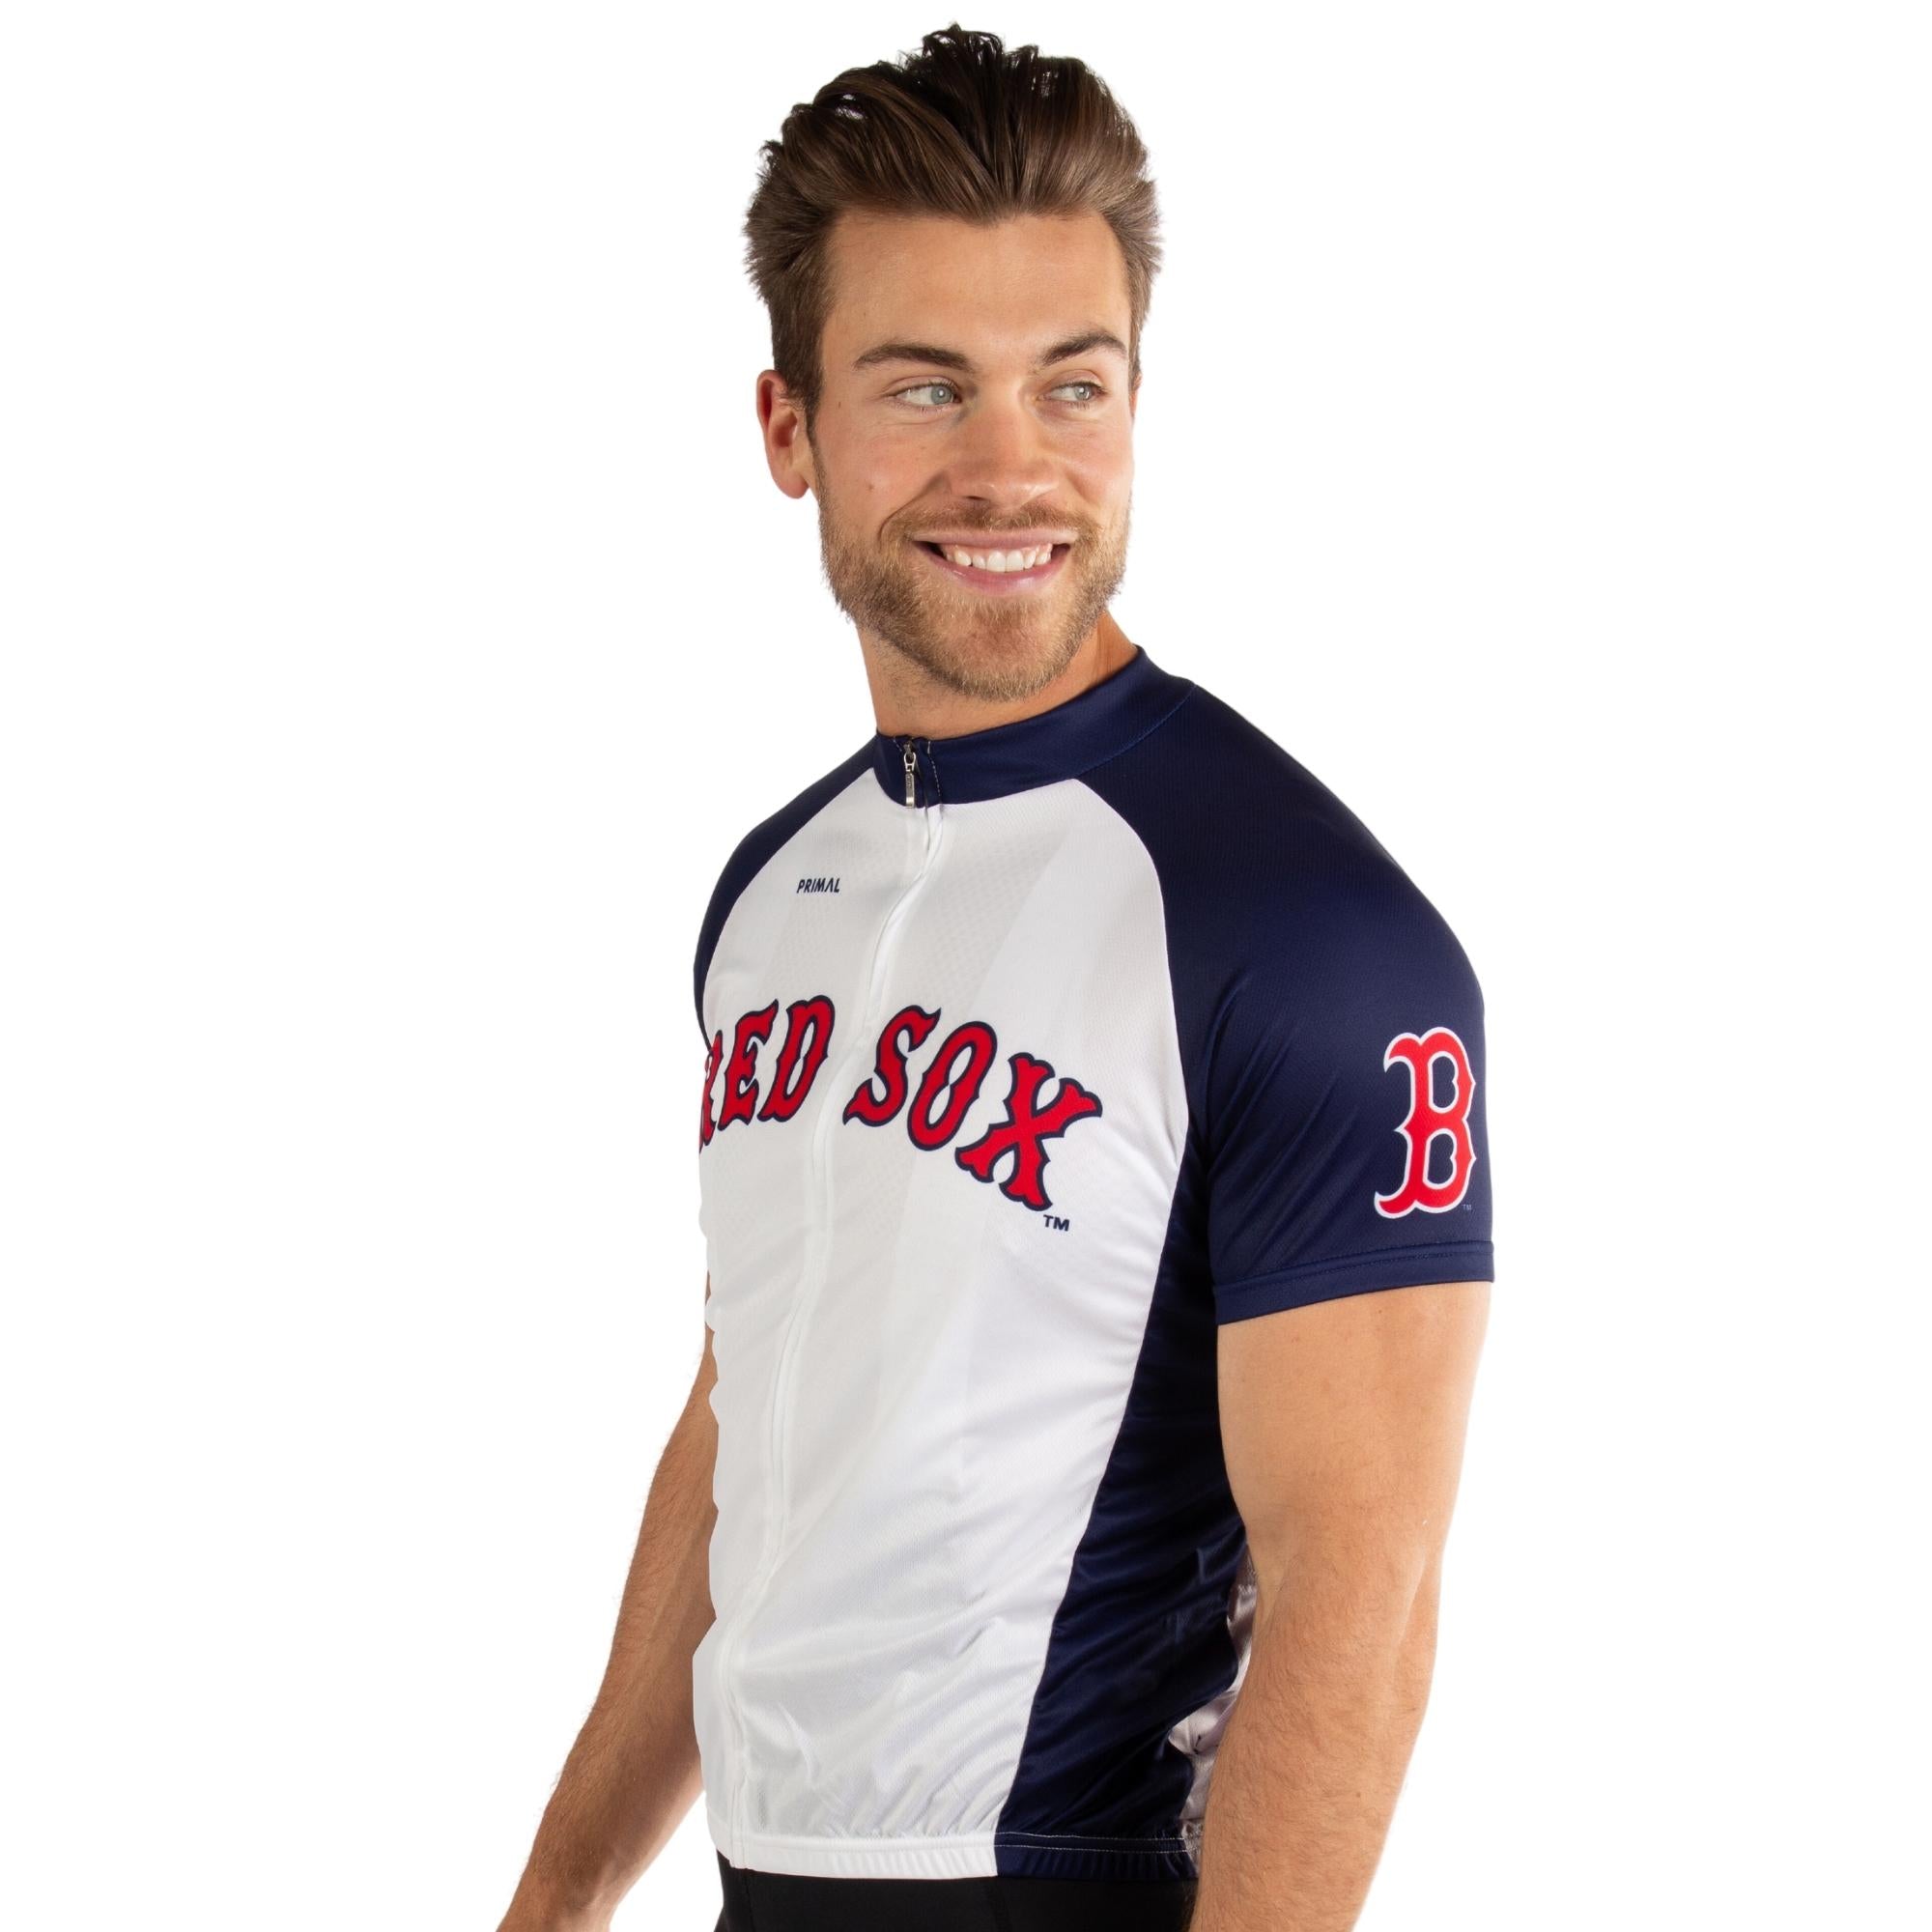 Nike Redsox Personalized Youth Home Jersey